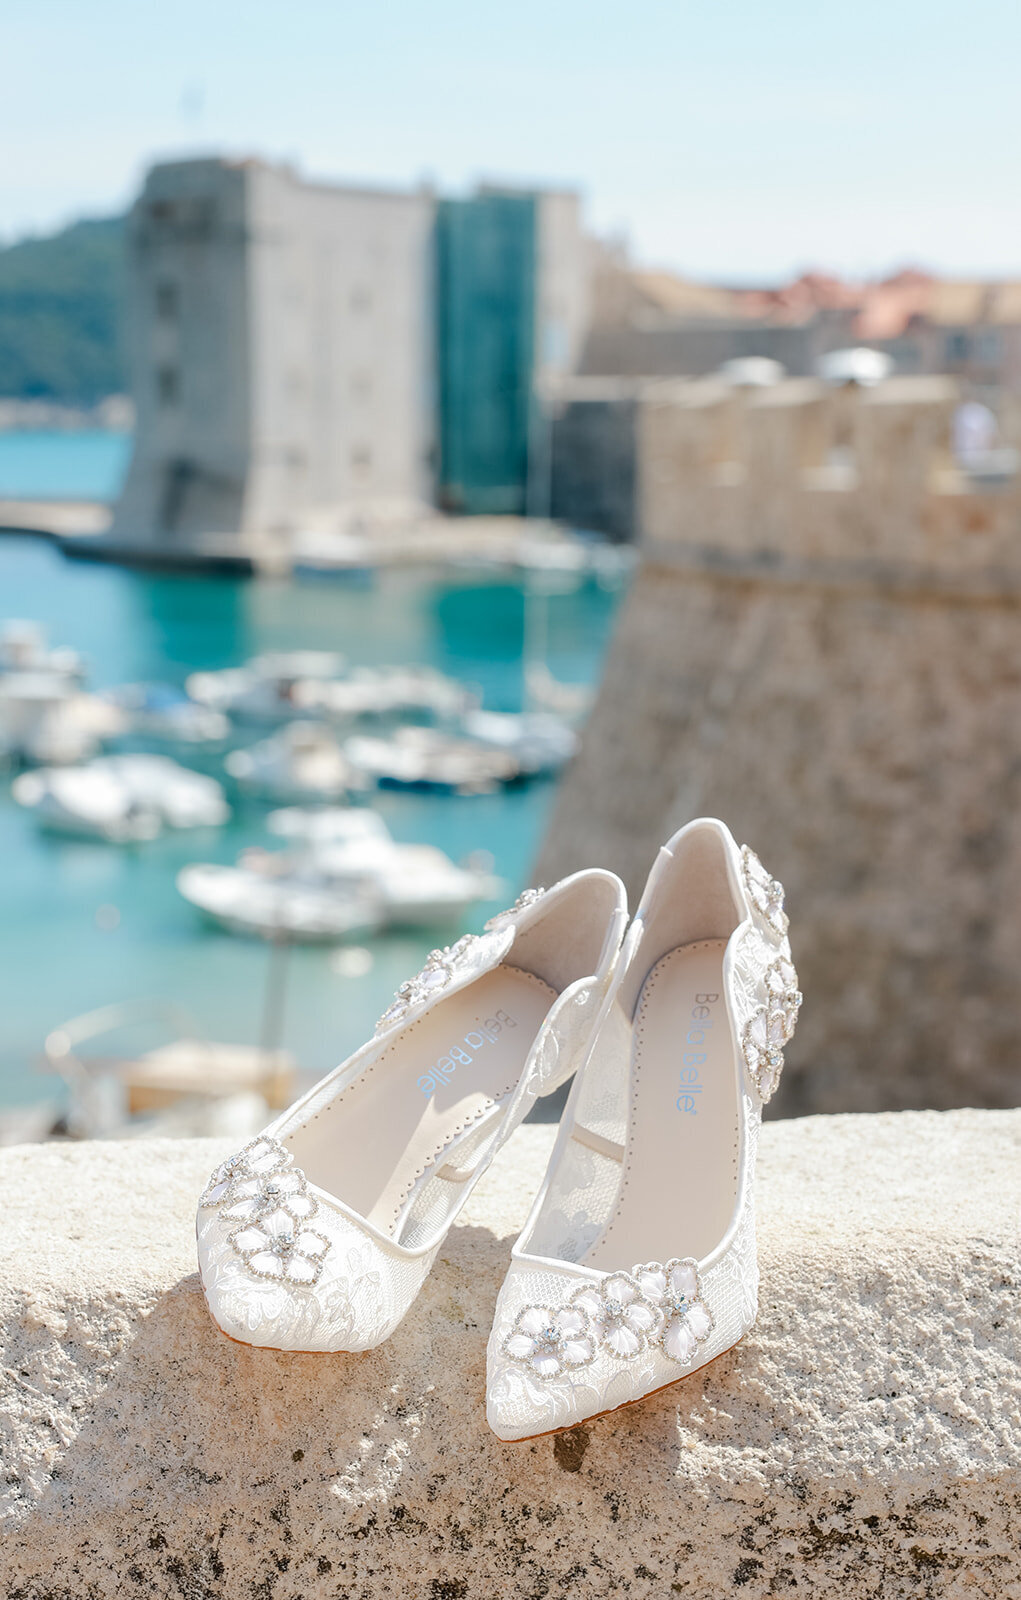 Experience Timeless Luxury: Immerse yourself in the breathtaking beauty of a destination wedding in Croatia through our exquisite image gallery. Indulge in the classic and timeless elegance captured in every frame. Let our high-end wedding planning services curate your dream wedding, creating an unforgettable experience for you and your loved ones.